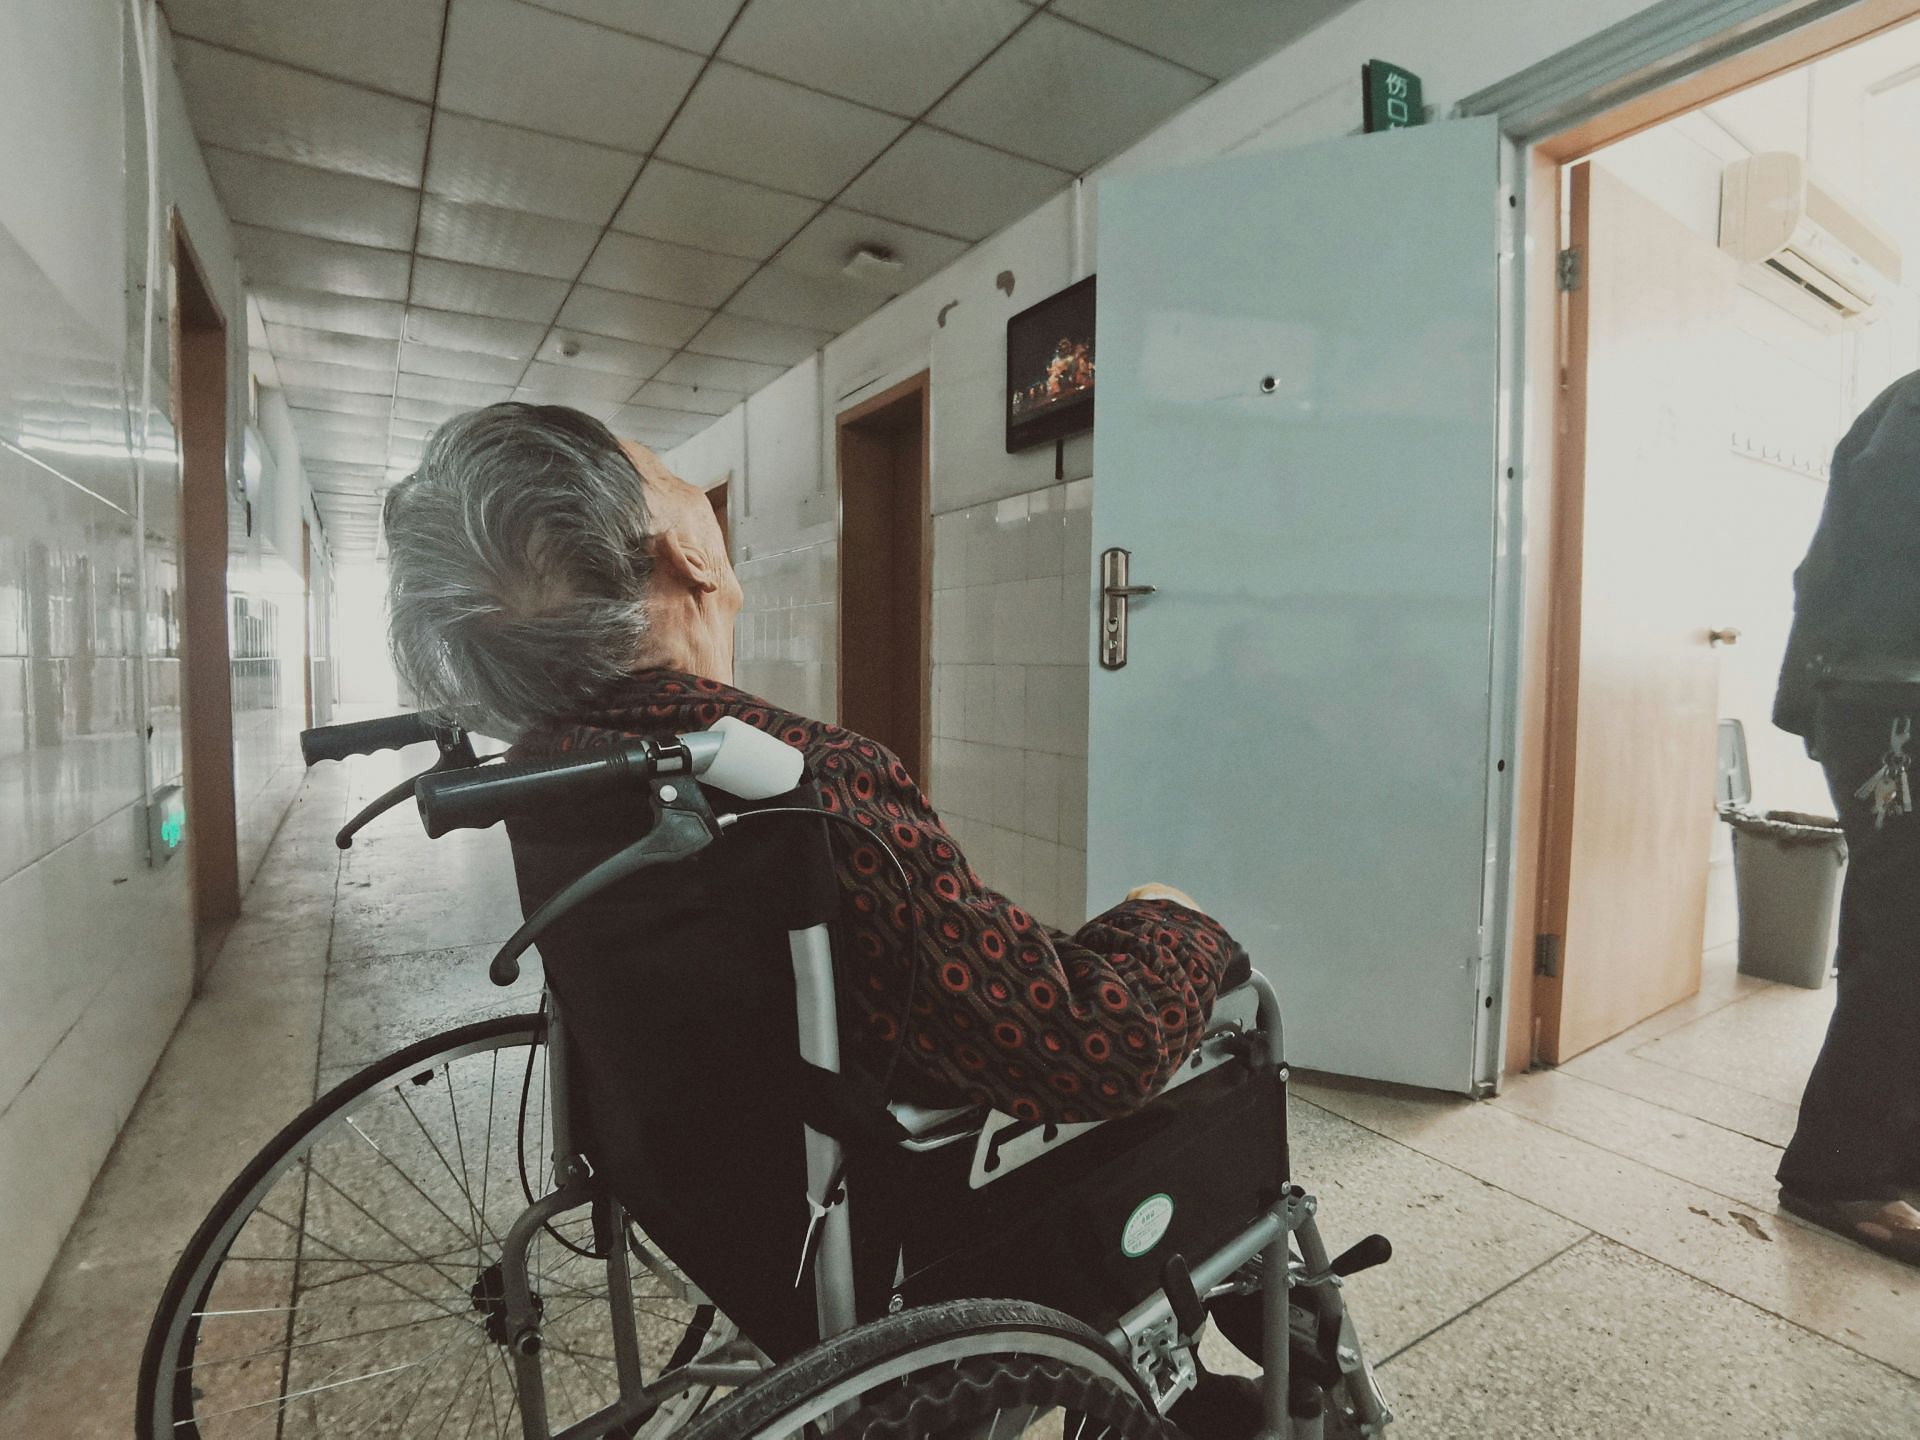 What are bedsores? Pressure injuries caused by prolonged pressure while lying down on the bed or sitting in a wheelchair (Image by Harry Cao/Unsplash)